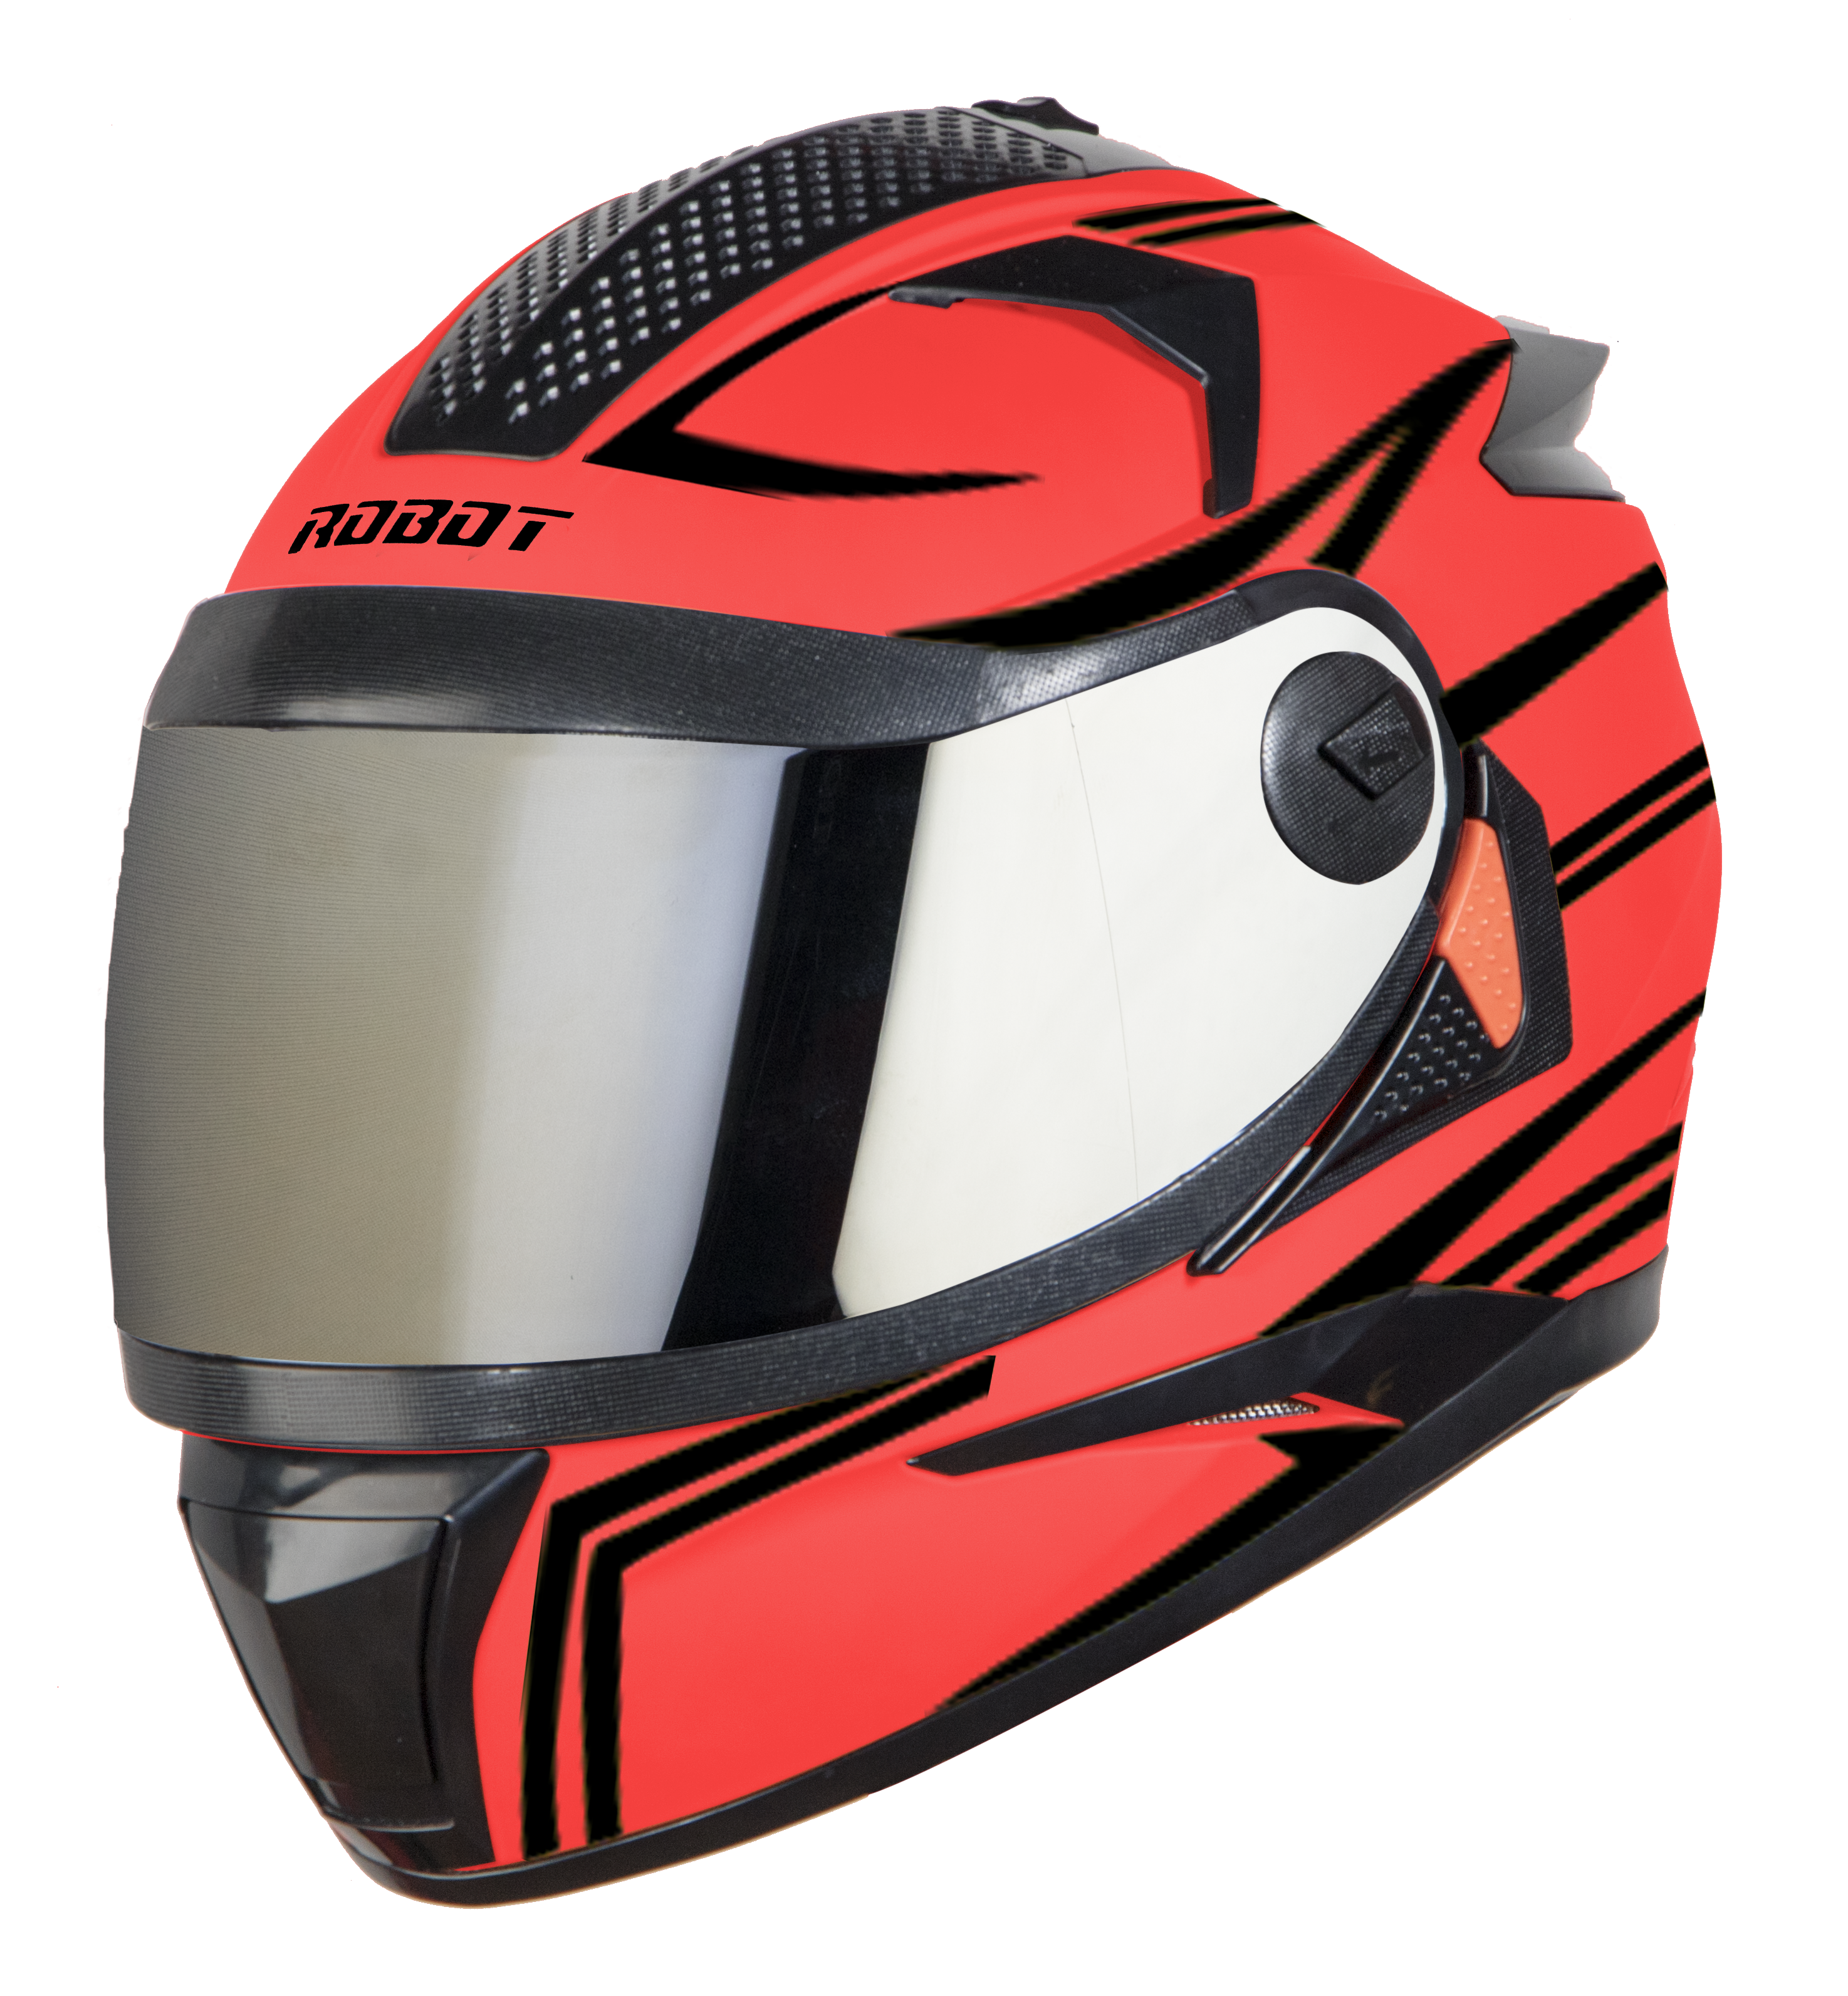 SBH-17 ROBOT REFLECTIVE GLOSSY FLUO WATERMELON (FITTED WITH CLEAR VISOR EXTRA SILVER CHROME VISOR FREE)